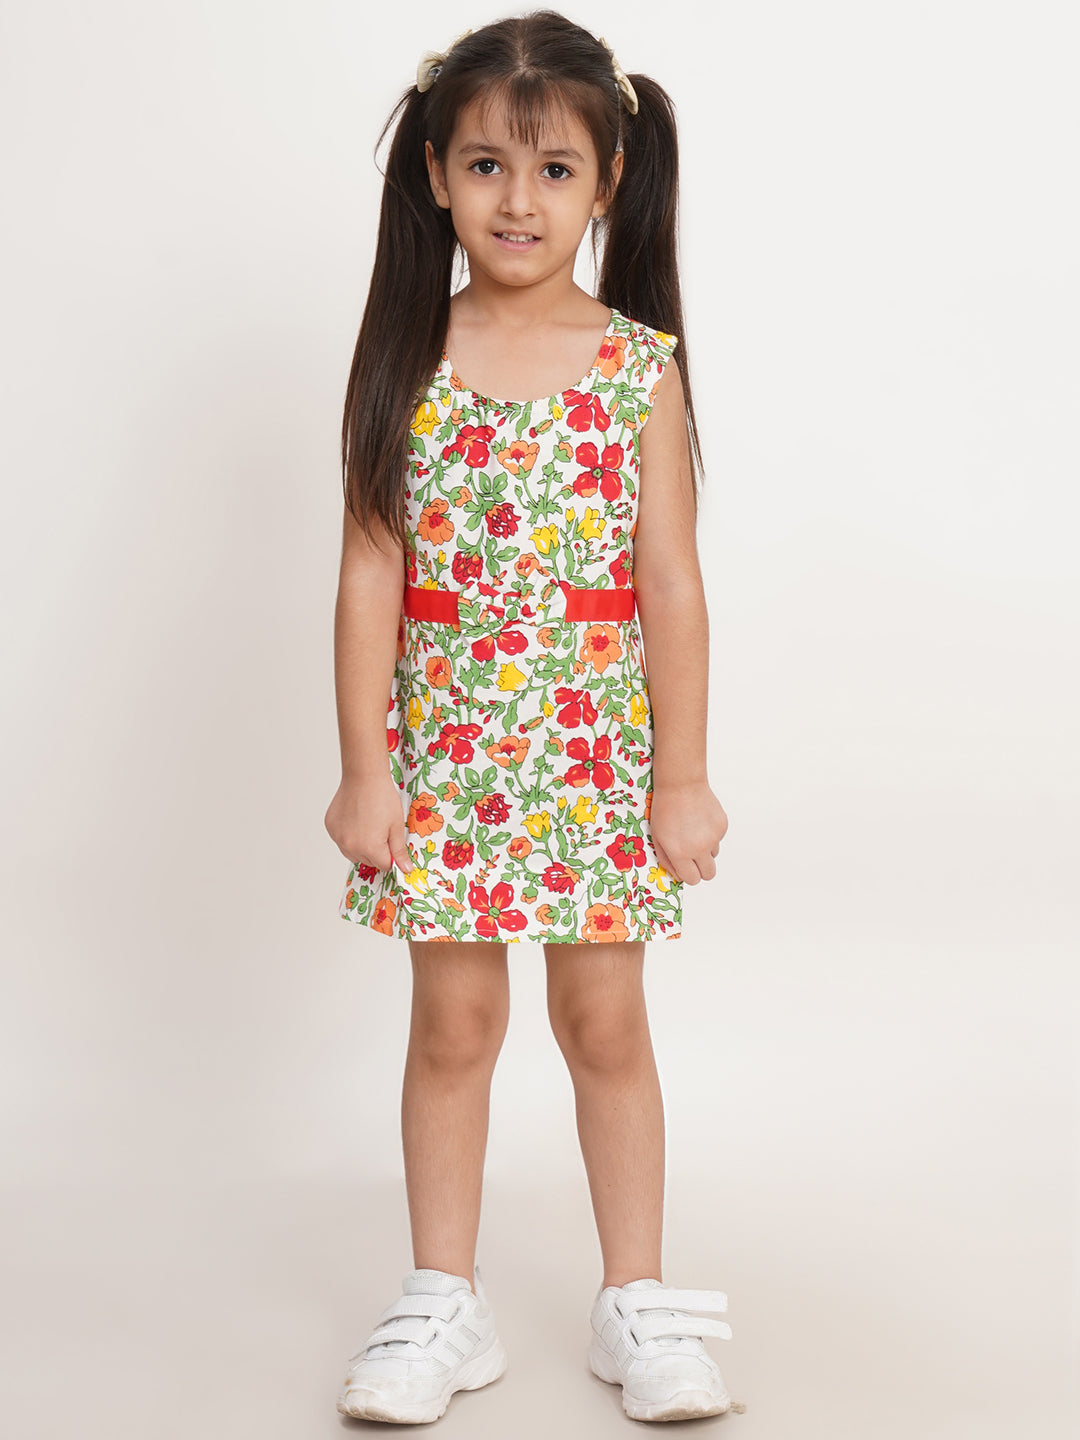 CREATIVE KID'S Girl Red & Green Floral Print Cotton A-Line Dress